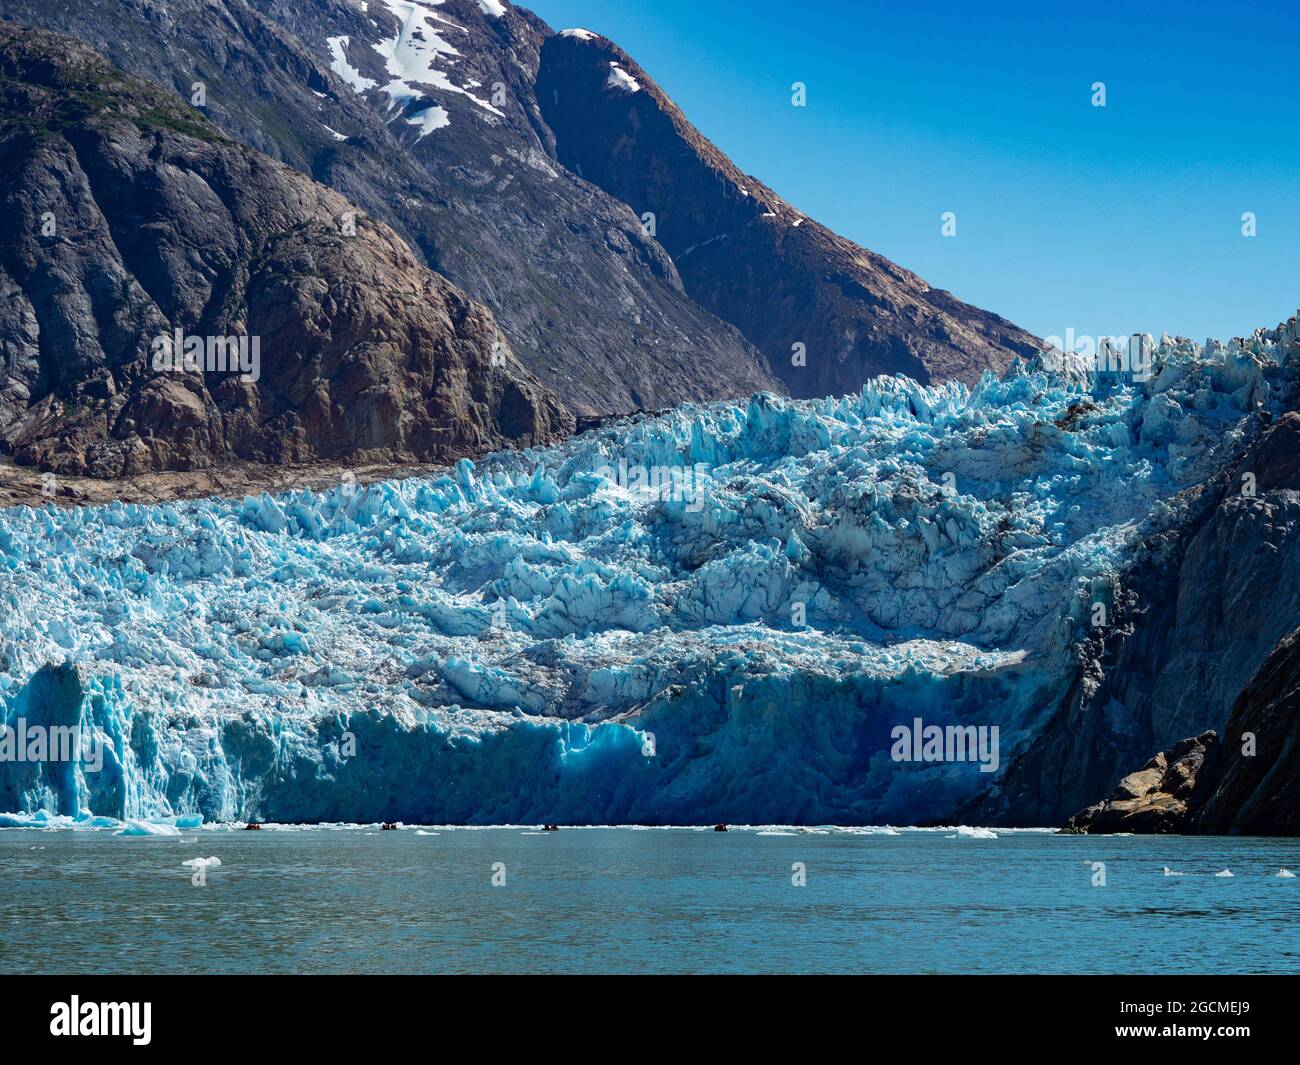 Exploring the beautiful tidewater glacier of South Sawyer glacier by zodiac in Tracy Arm wilderness area, Tongass National Forest, Alaska USA Stock Photo